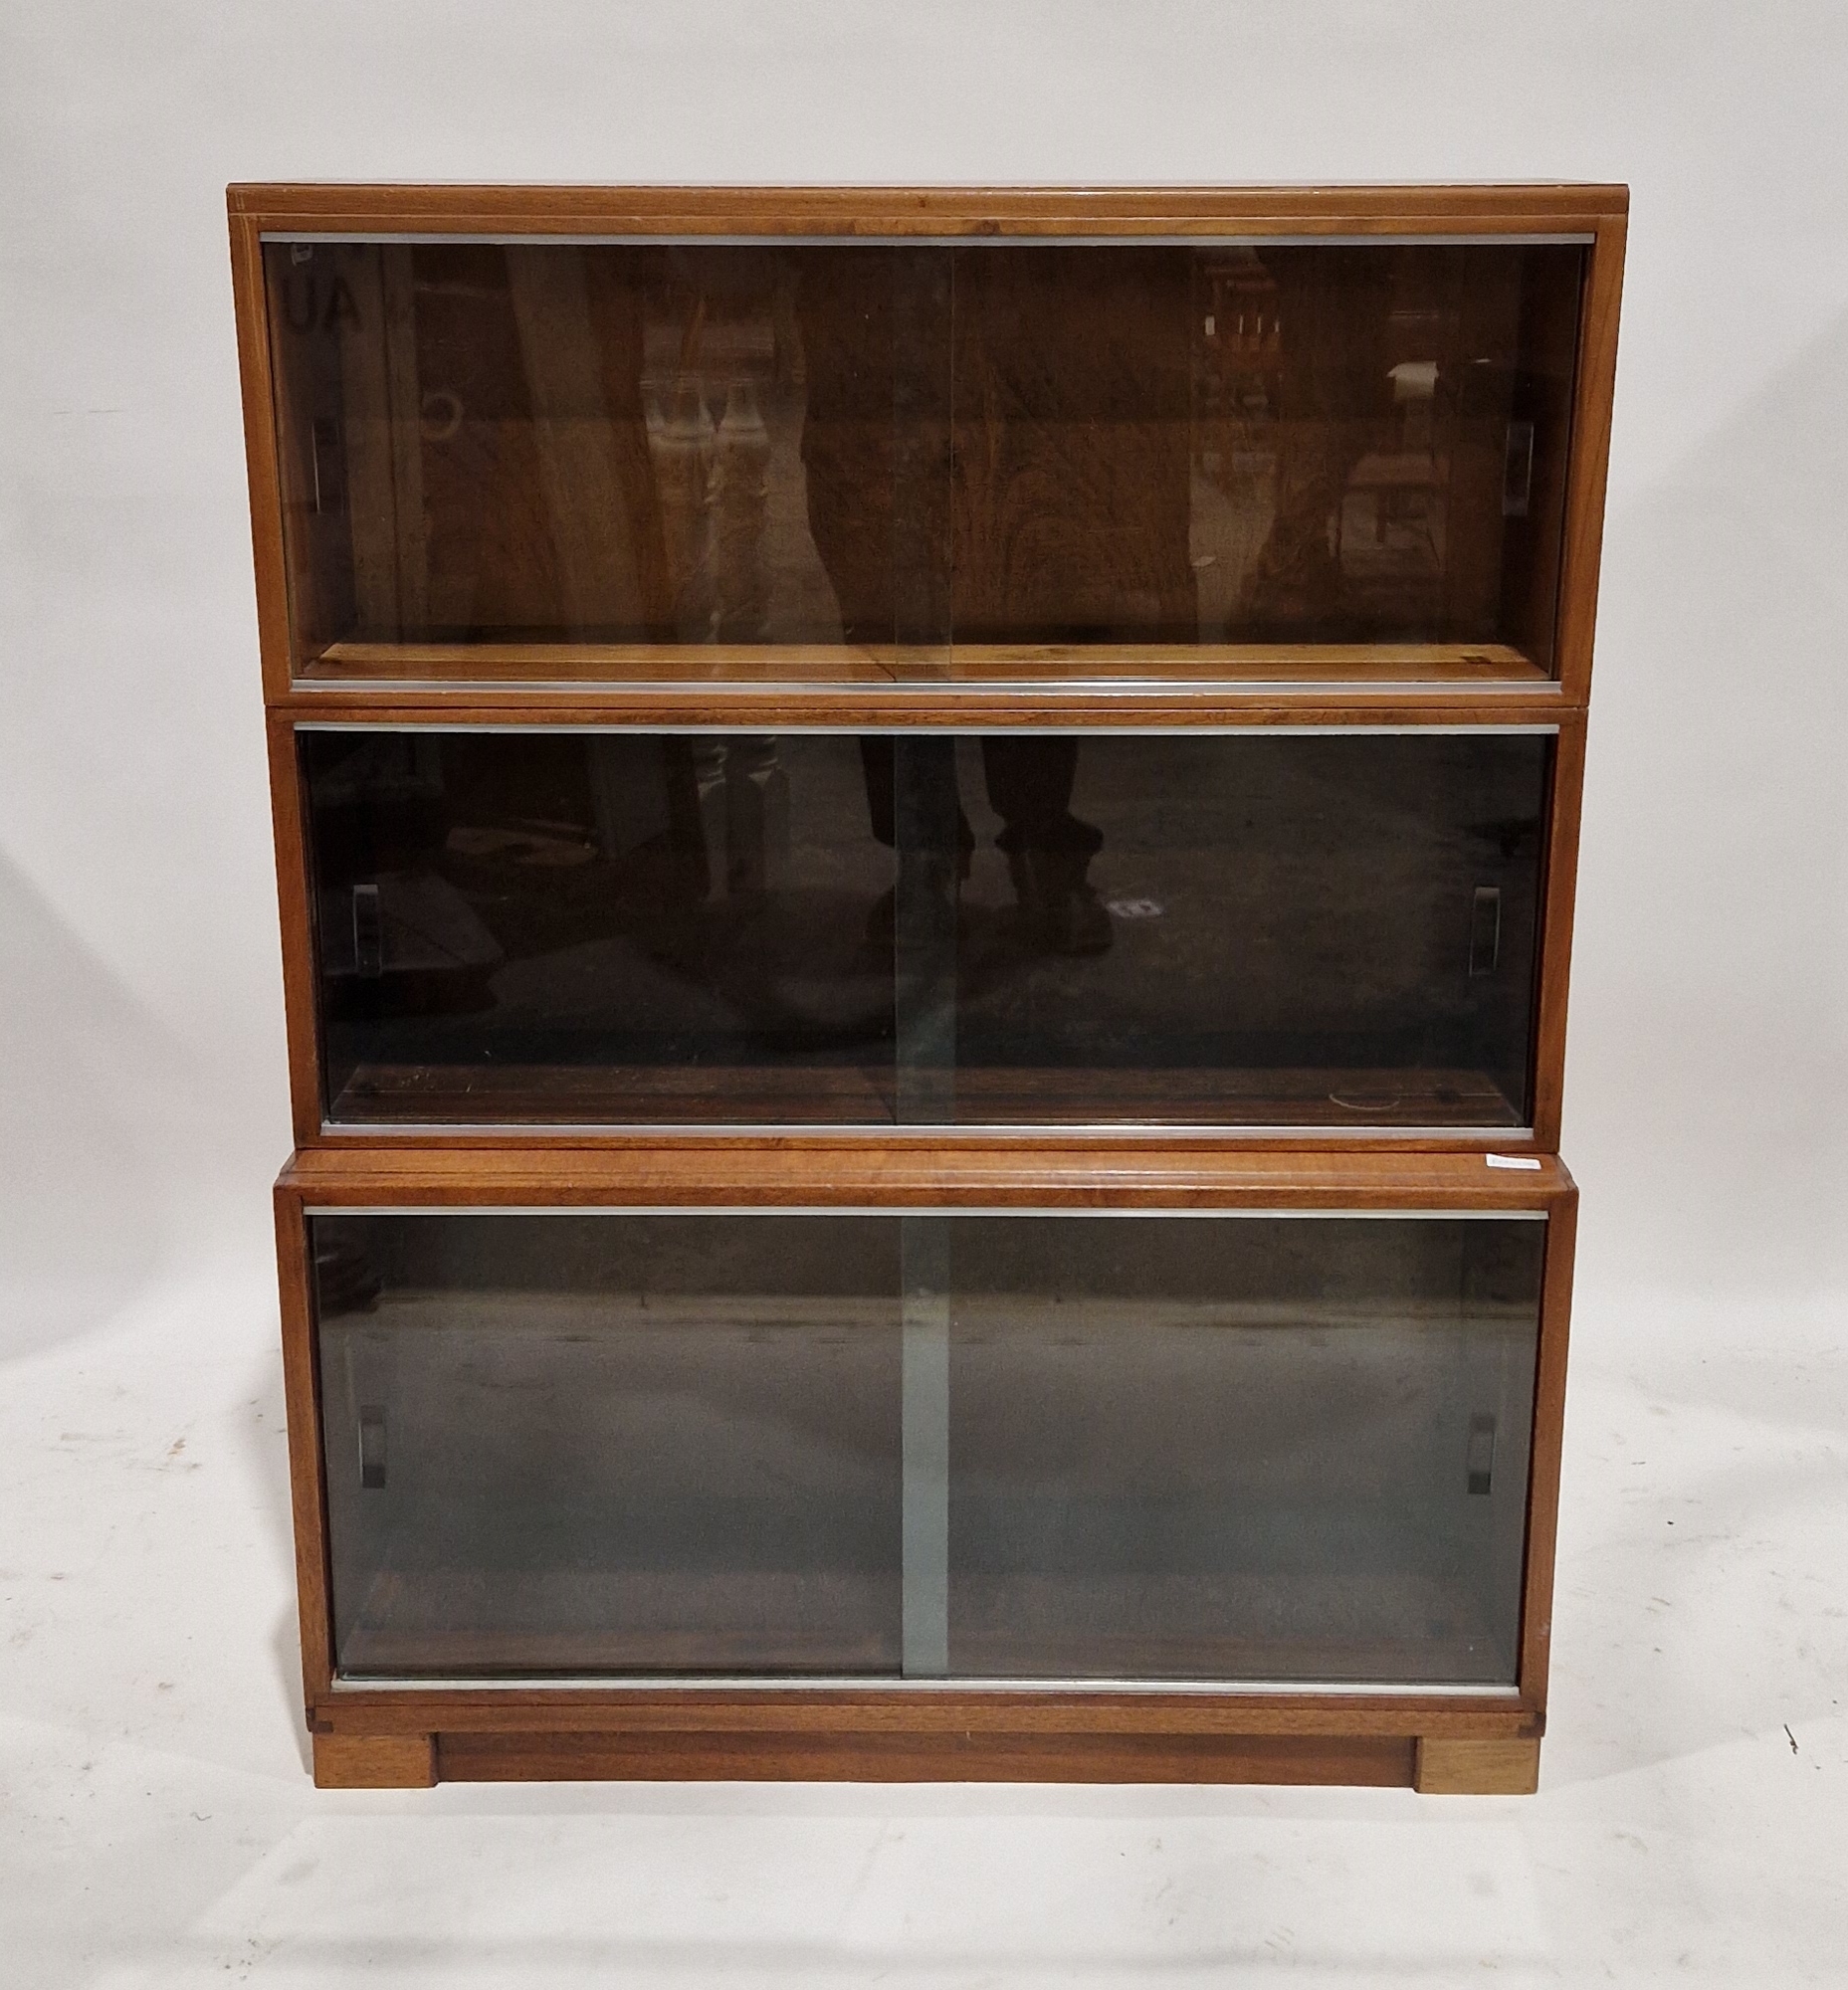 Three-section stacking glazed bookcase, each tier with two sliding glass doors, 114cm high x 89cm